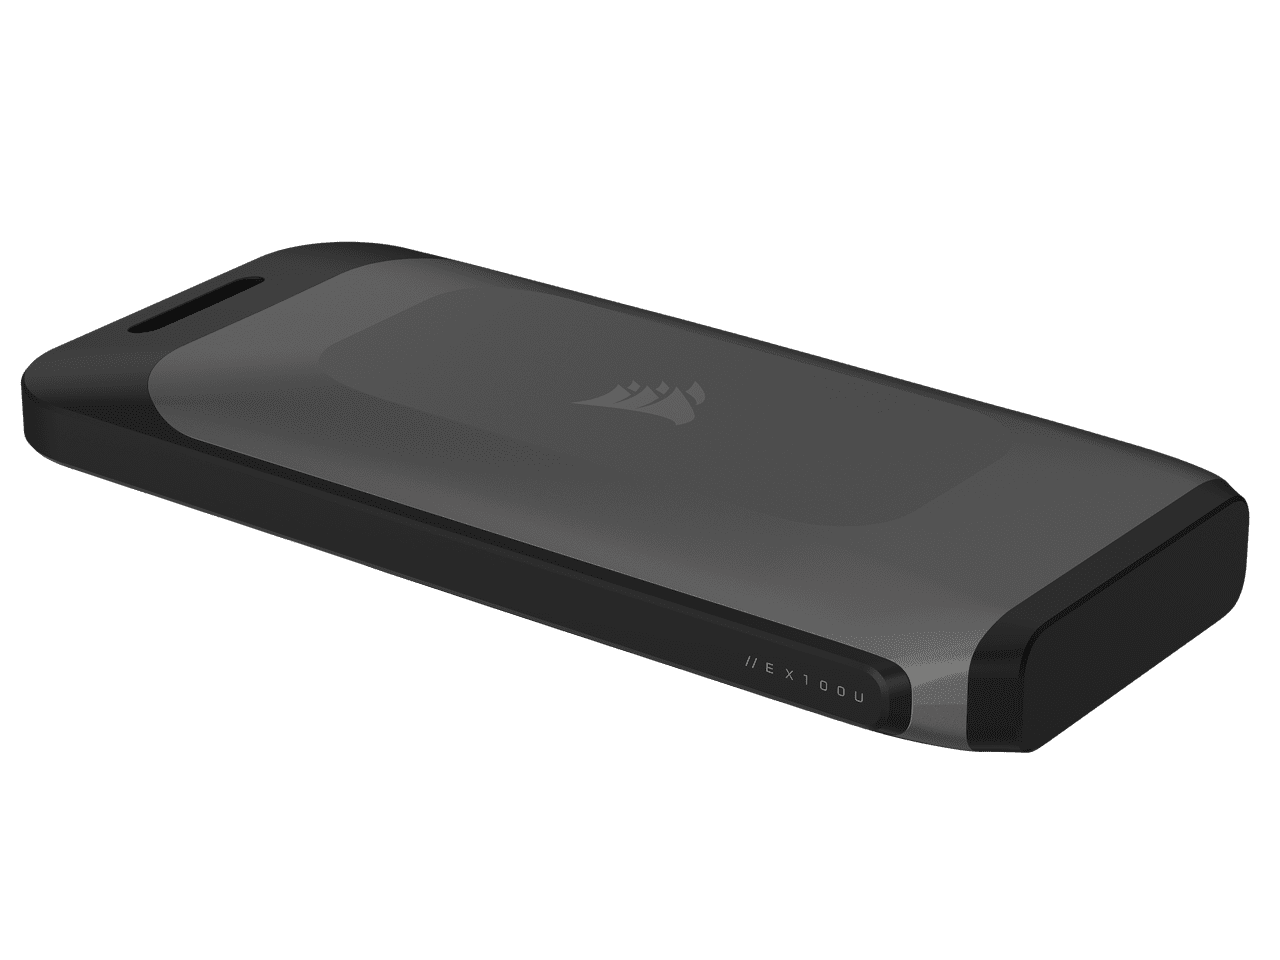 Corsair EX100U 4TB Portable USB Type-C Storage Drive - Blazing-Fast Storage  to Any PC/Mac/Console, Gen2 x2 Connection, Up to 20Gbps, Plug and Play